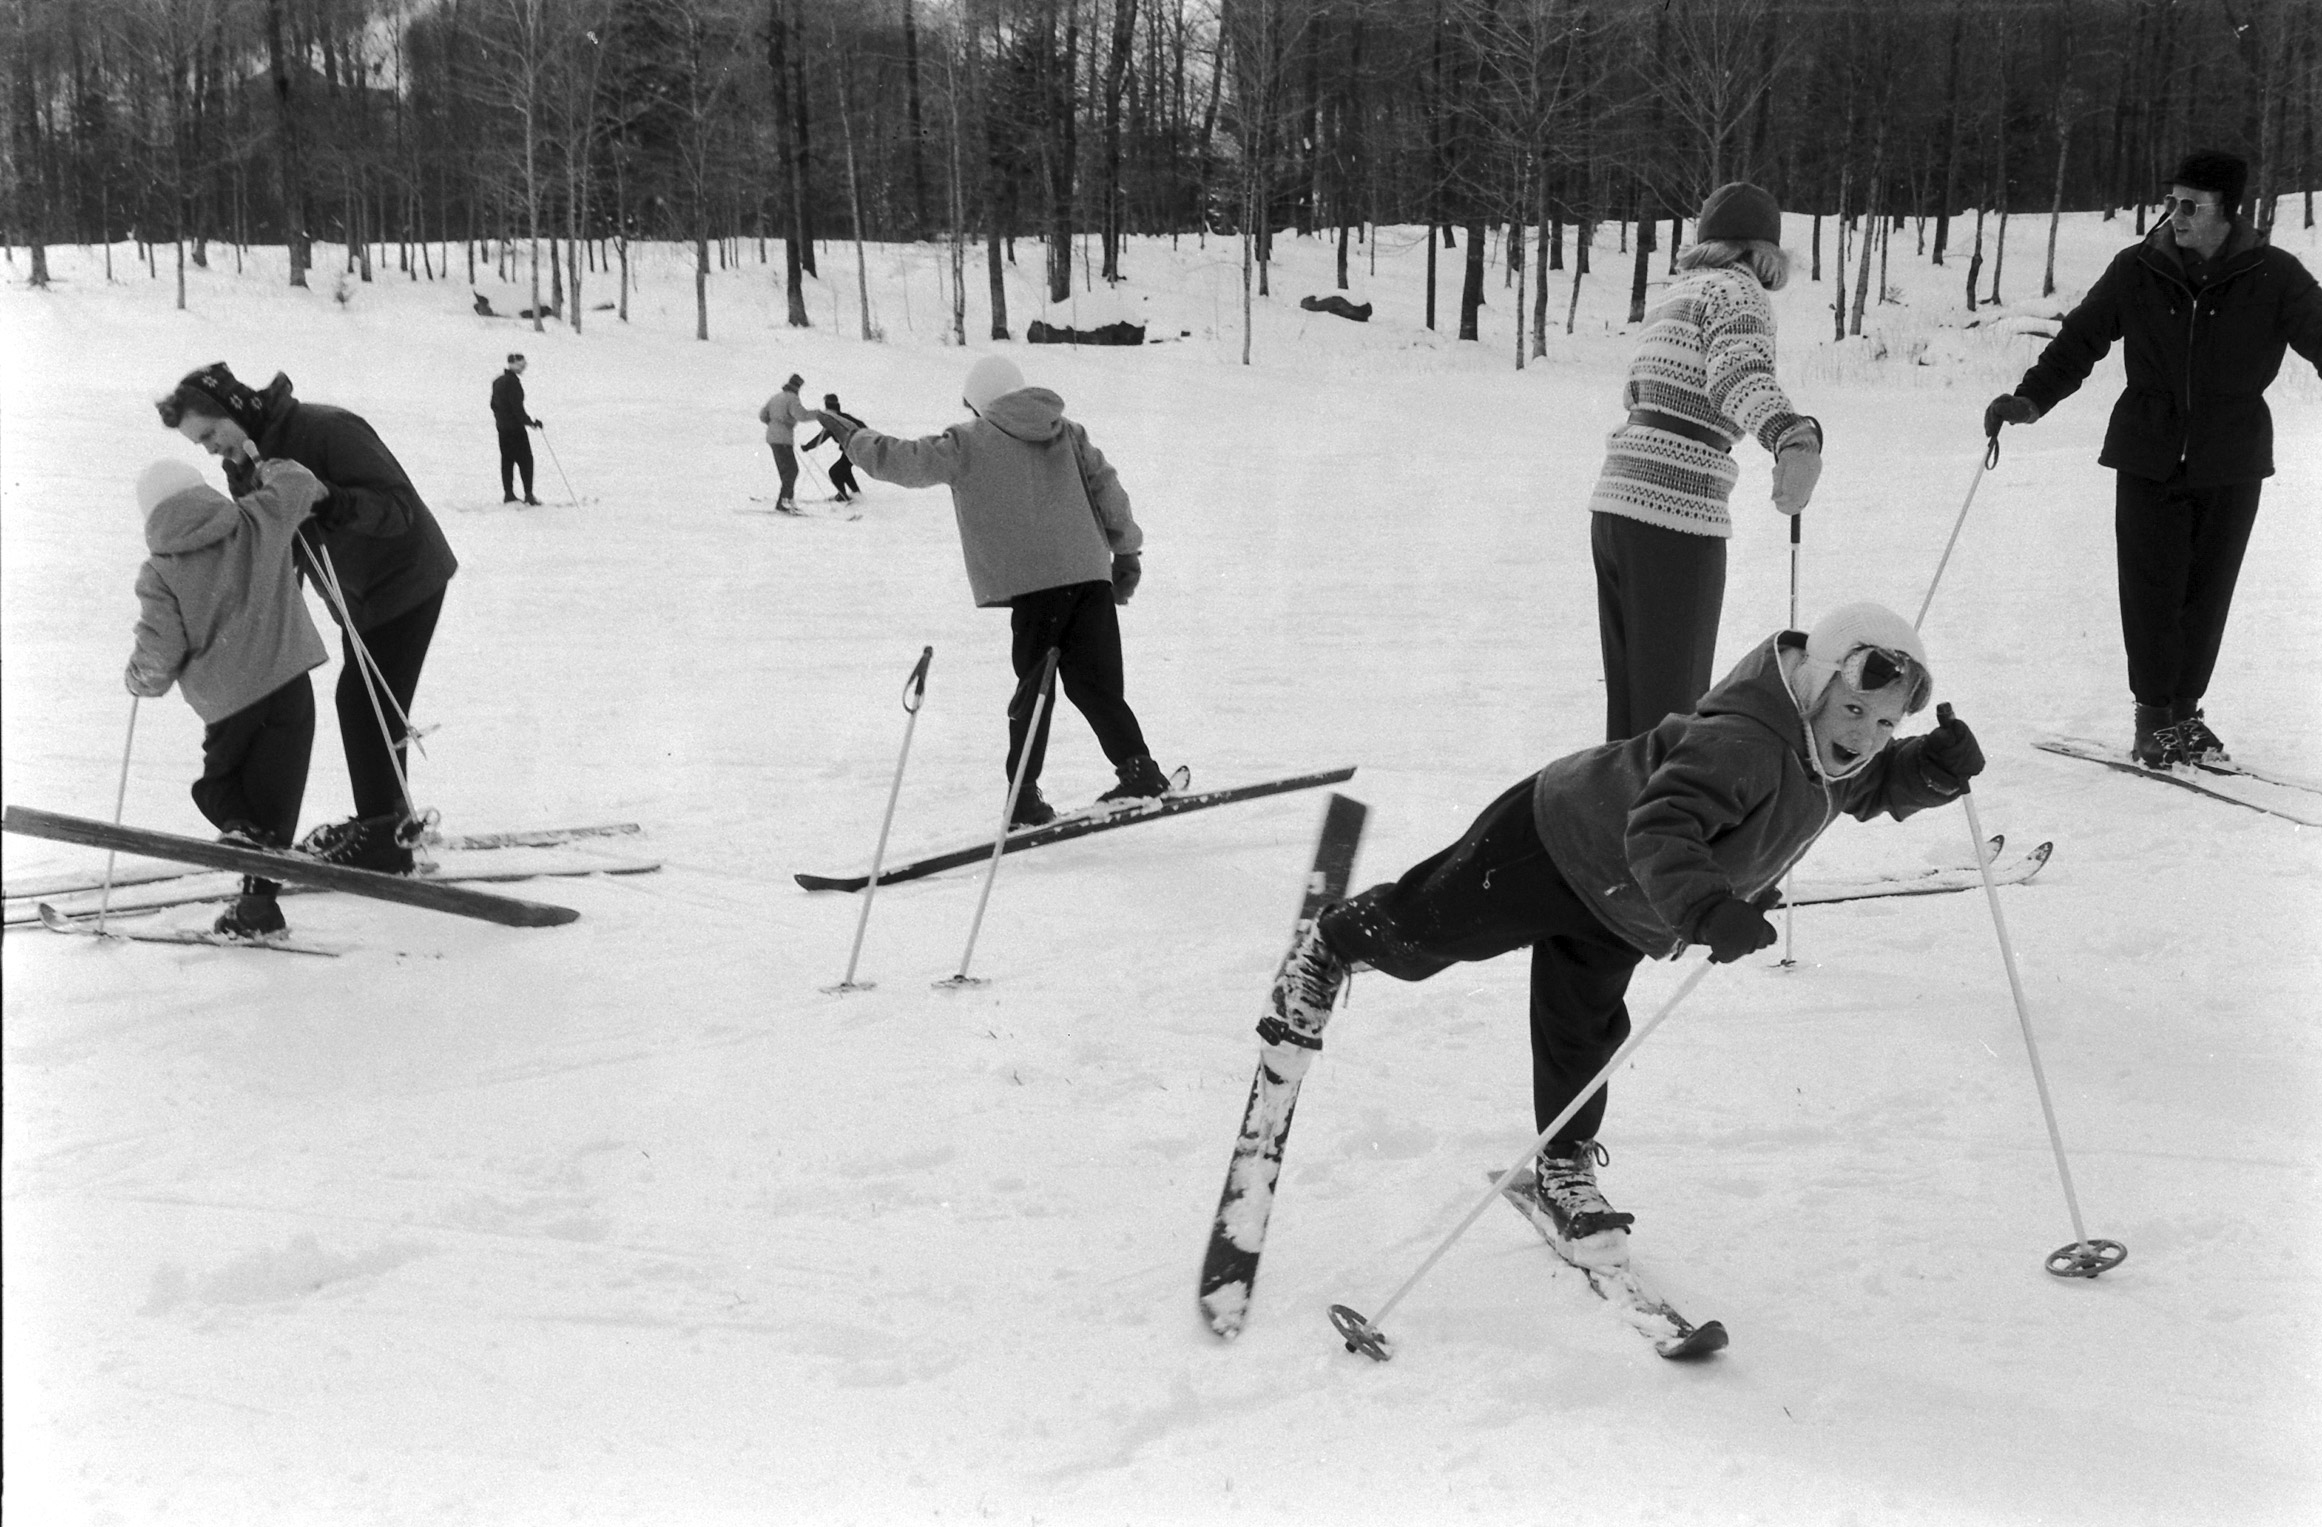 Skiers at Mount Snow in Vermont, 1957.